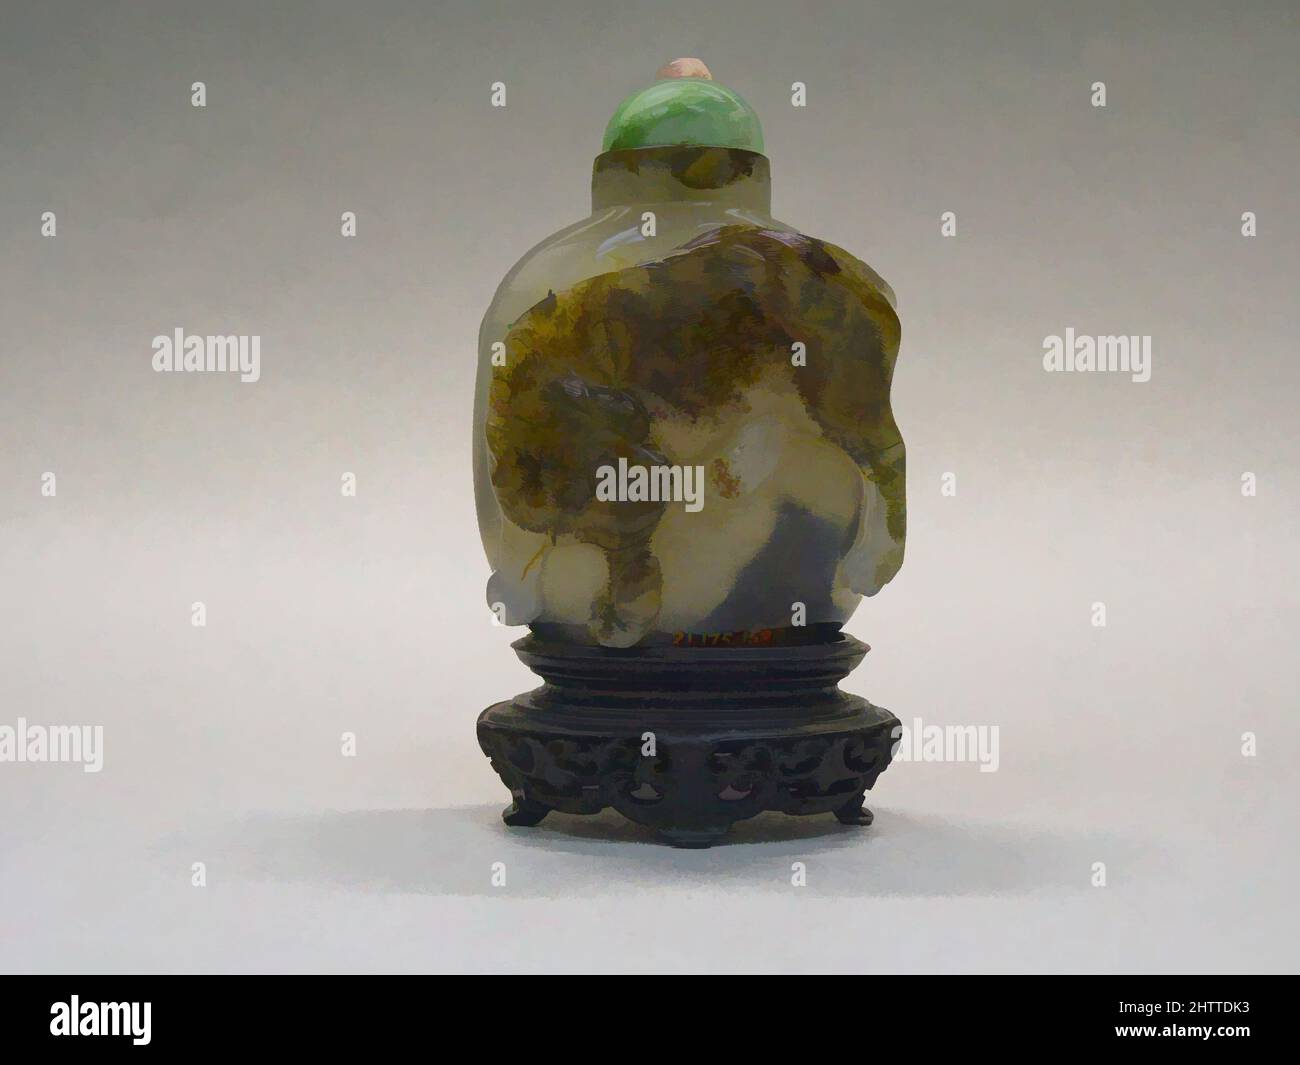 Snuff Bottle, Qing dynasty (1644–1911), Qianlong period (1736–95), China, Murrhina agate with green jade and pink tourmaline stopper, H. 3 1/4 in. (8.3 cm), Snuff Bottles Stock Photo